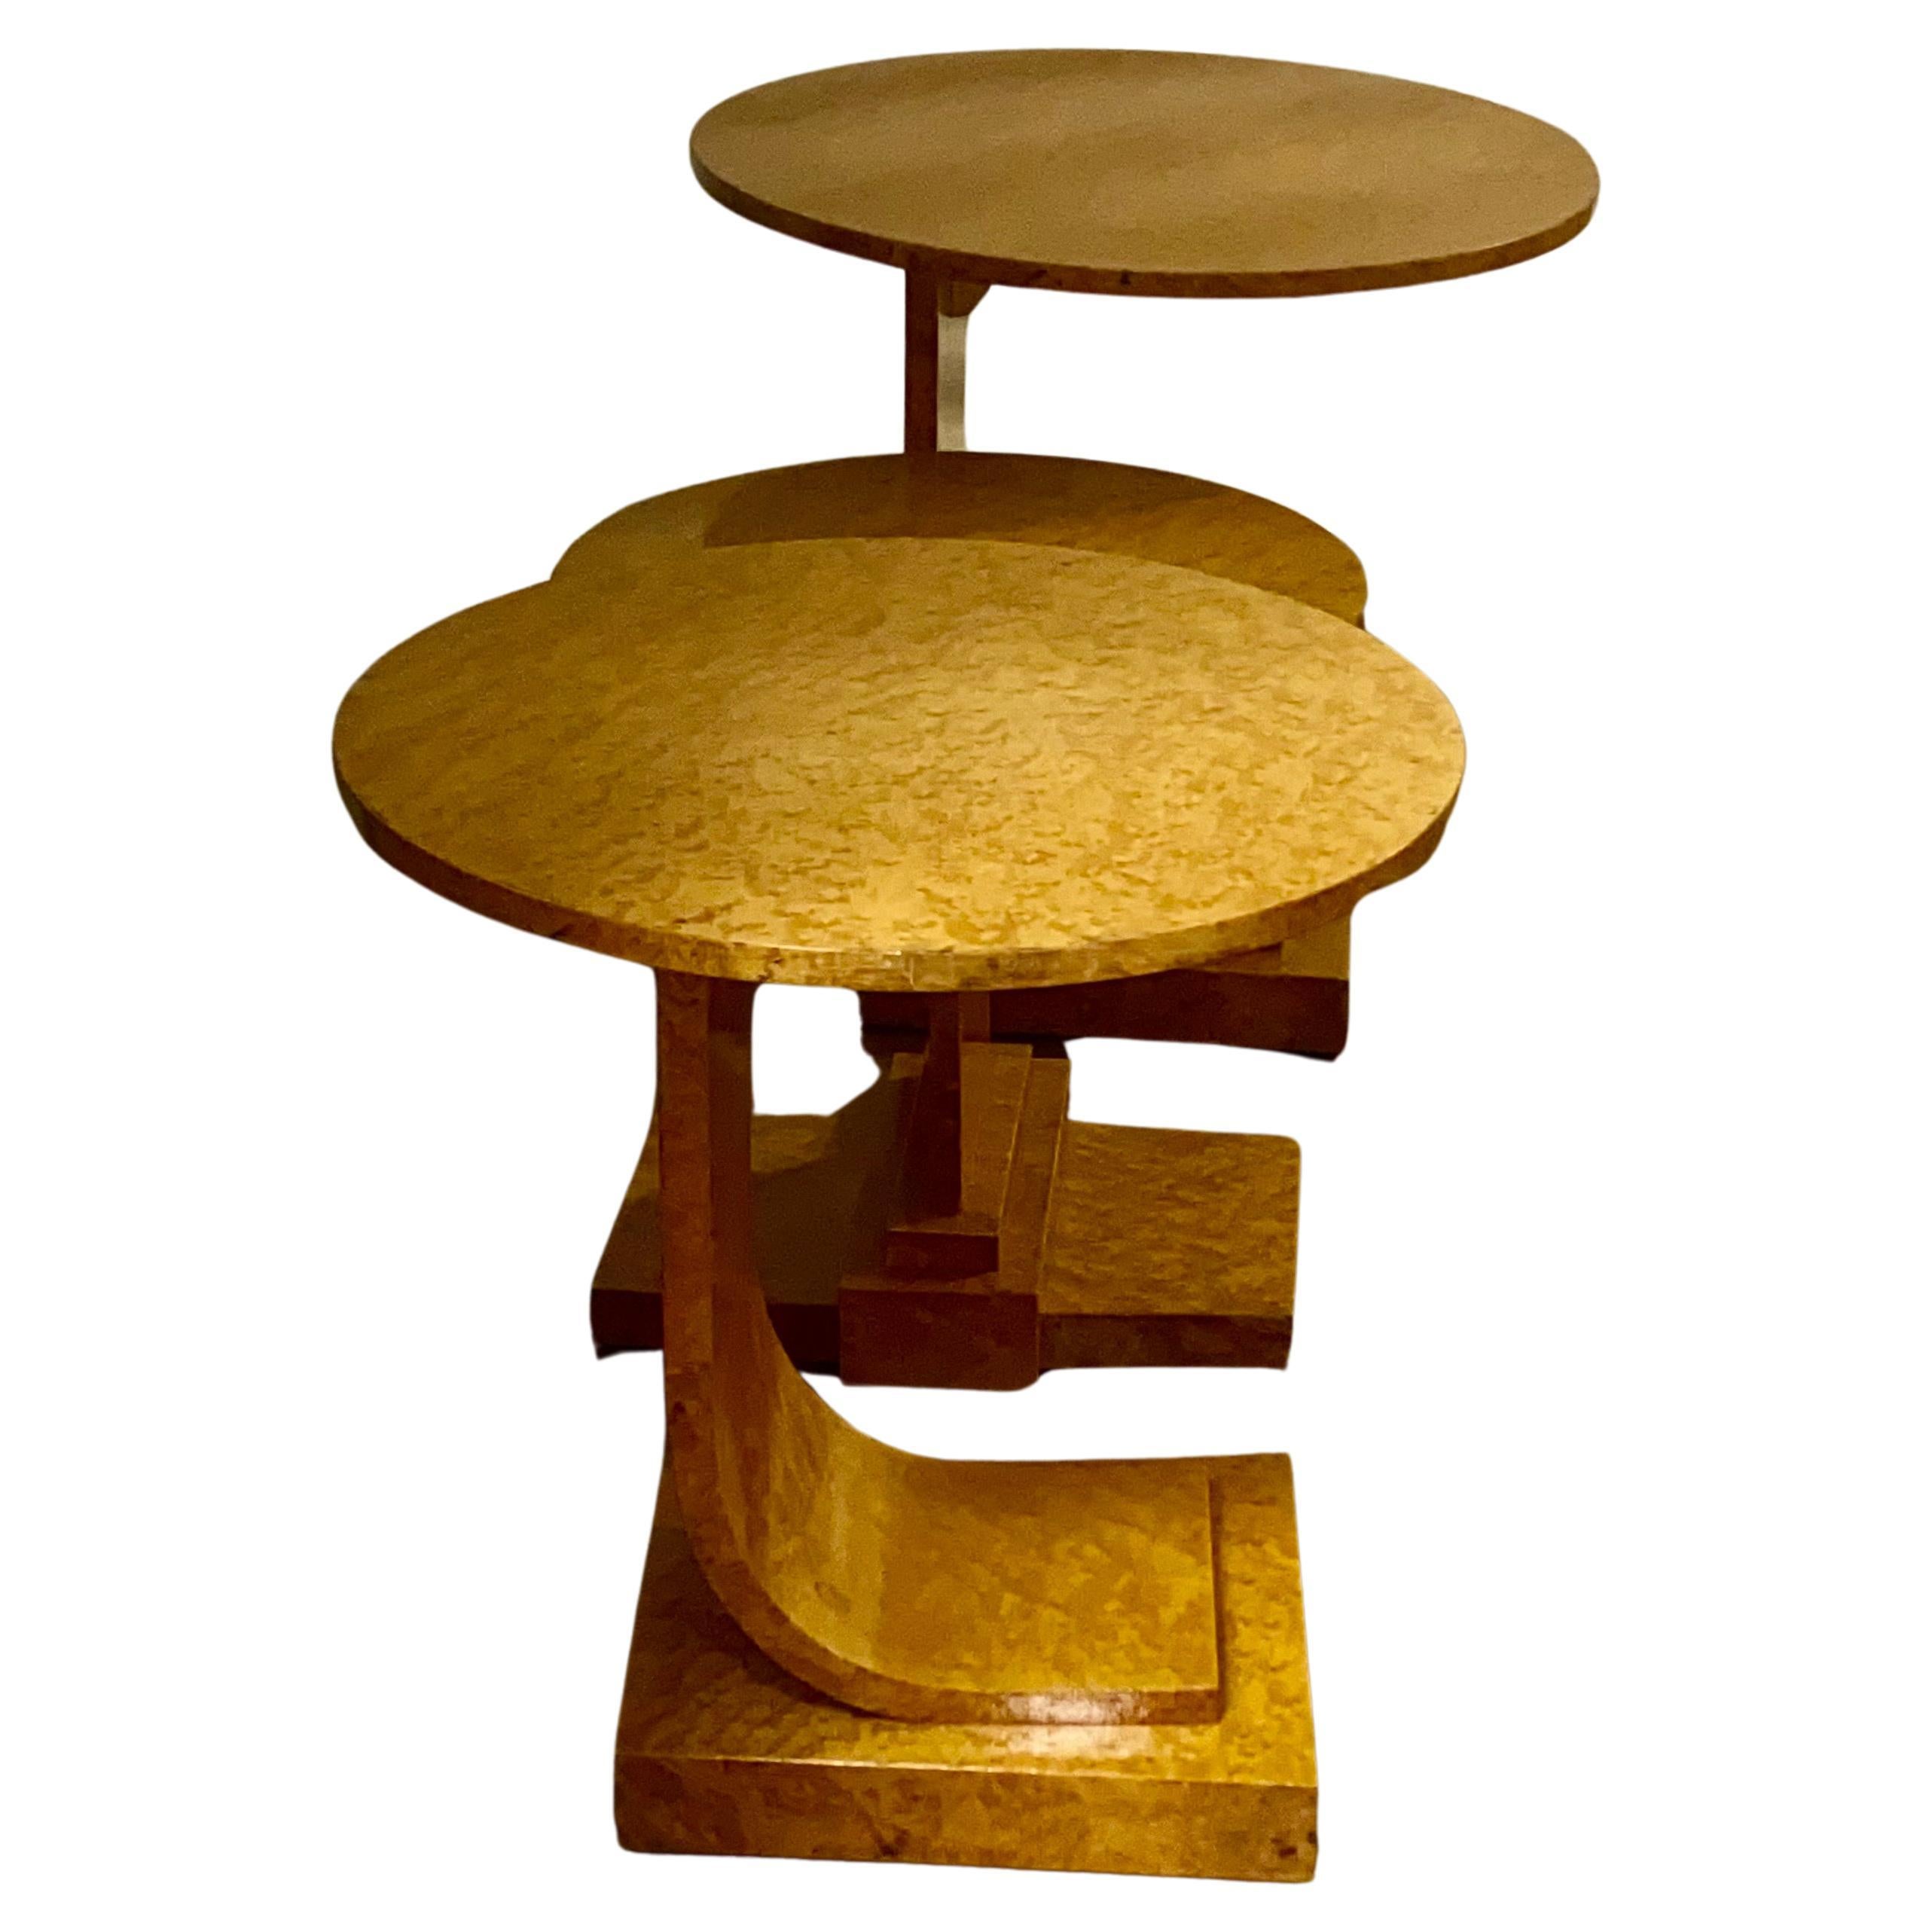 A Rare Art Deco Blonde Birds Eye Maple J Nest of Tables by Epstein Circa 1930 For Sale 3